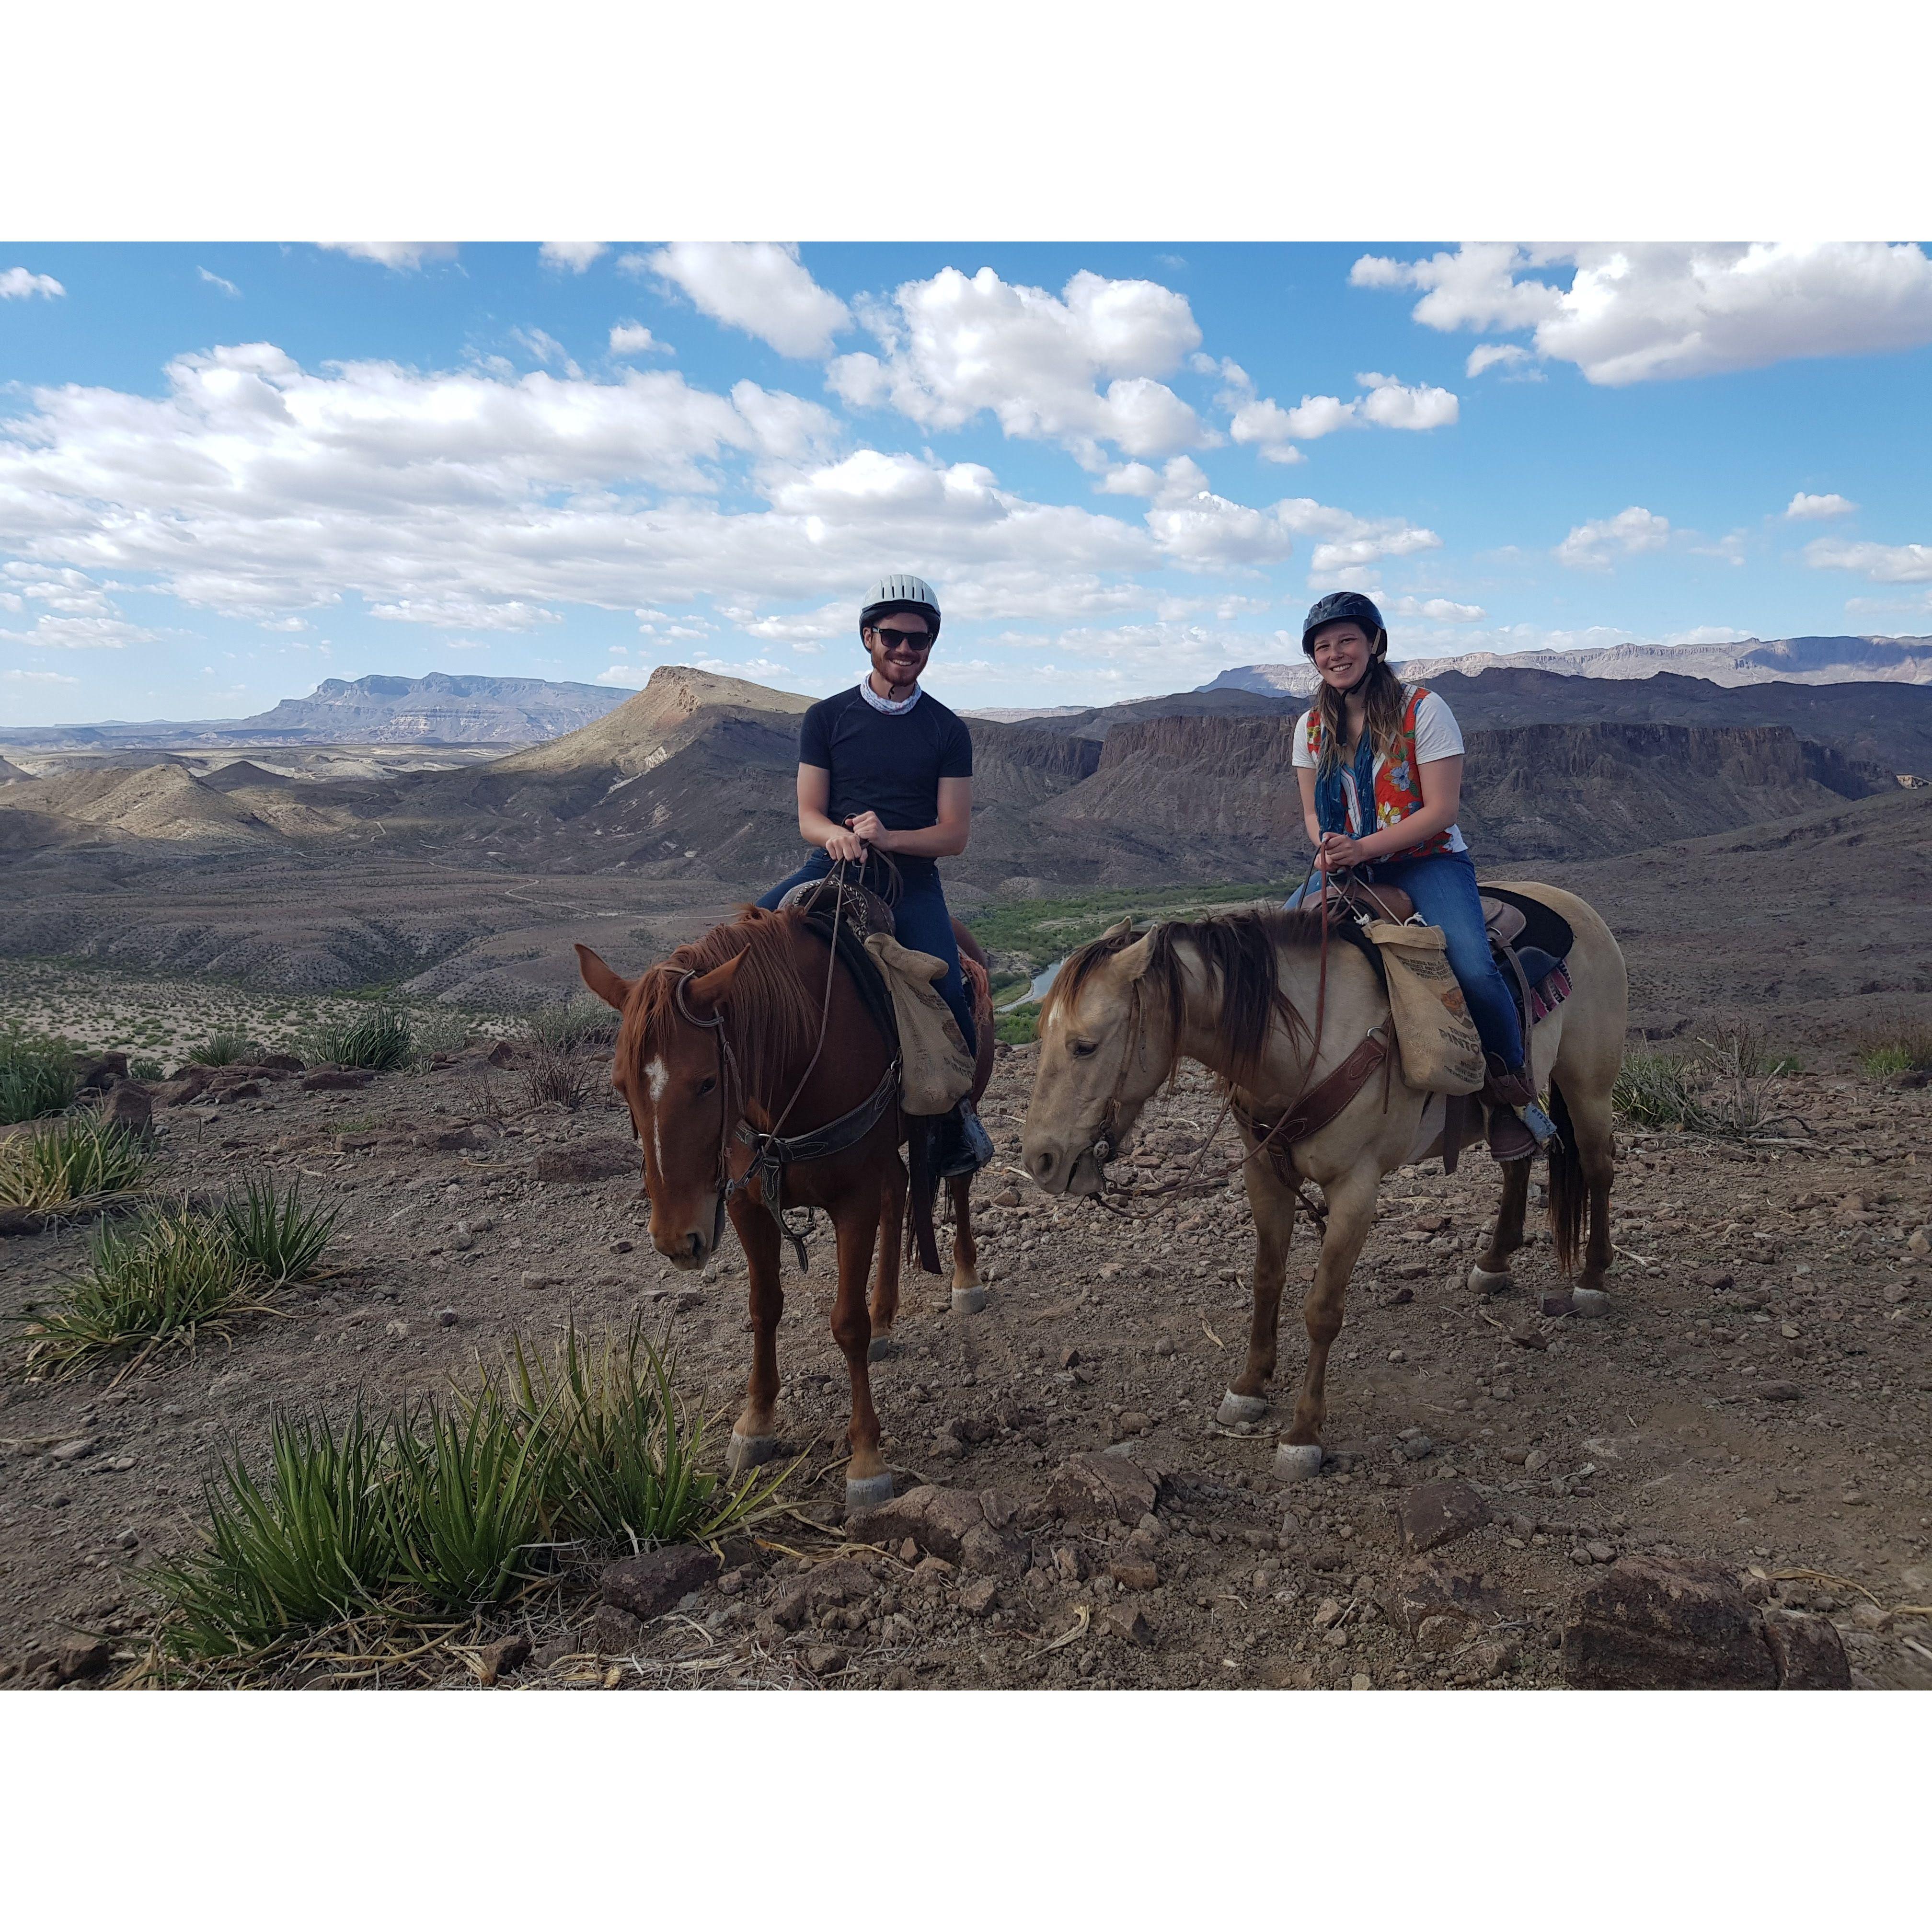 Josh riding Lily, Lili riding Azul. Excursion in Big Bend National Park March 2021